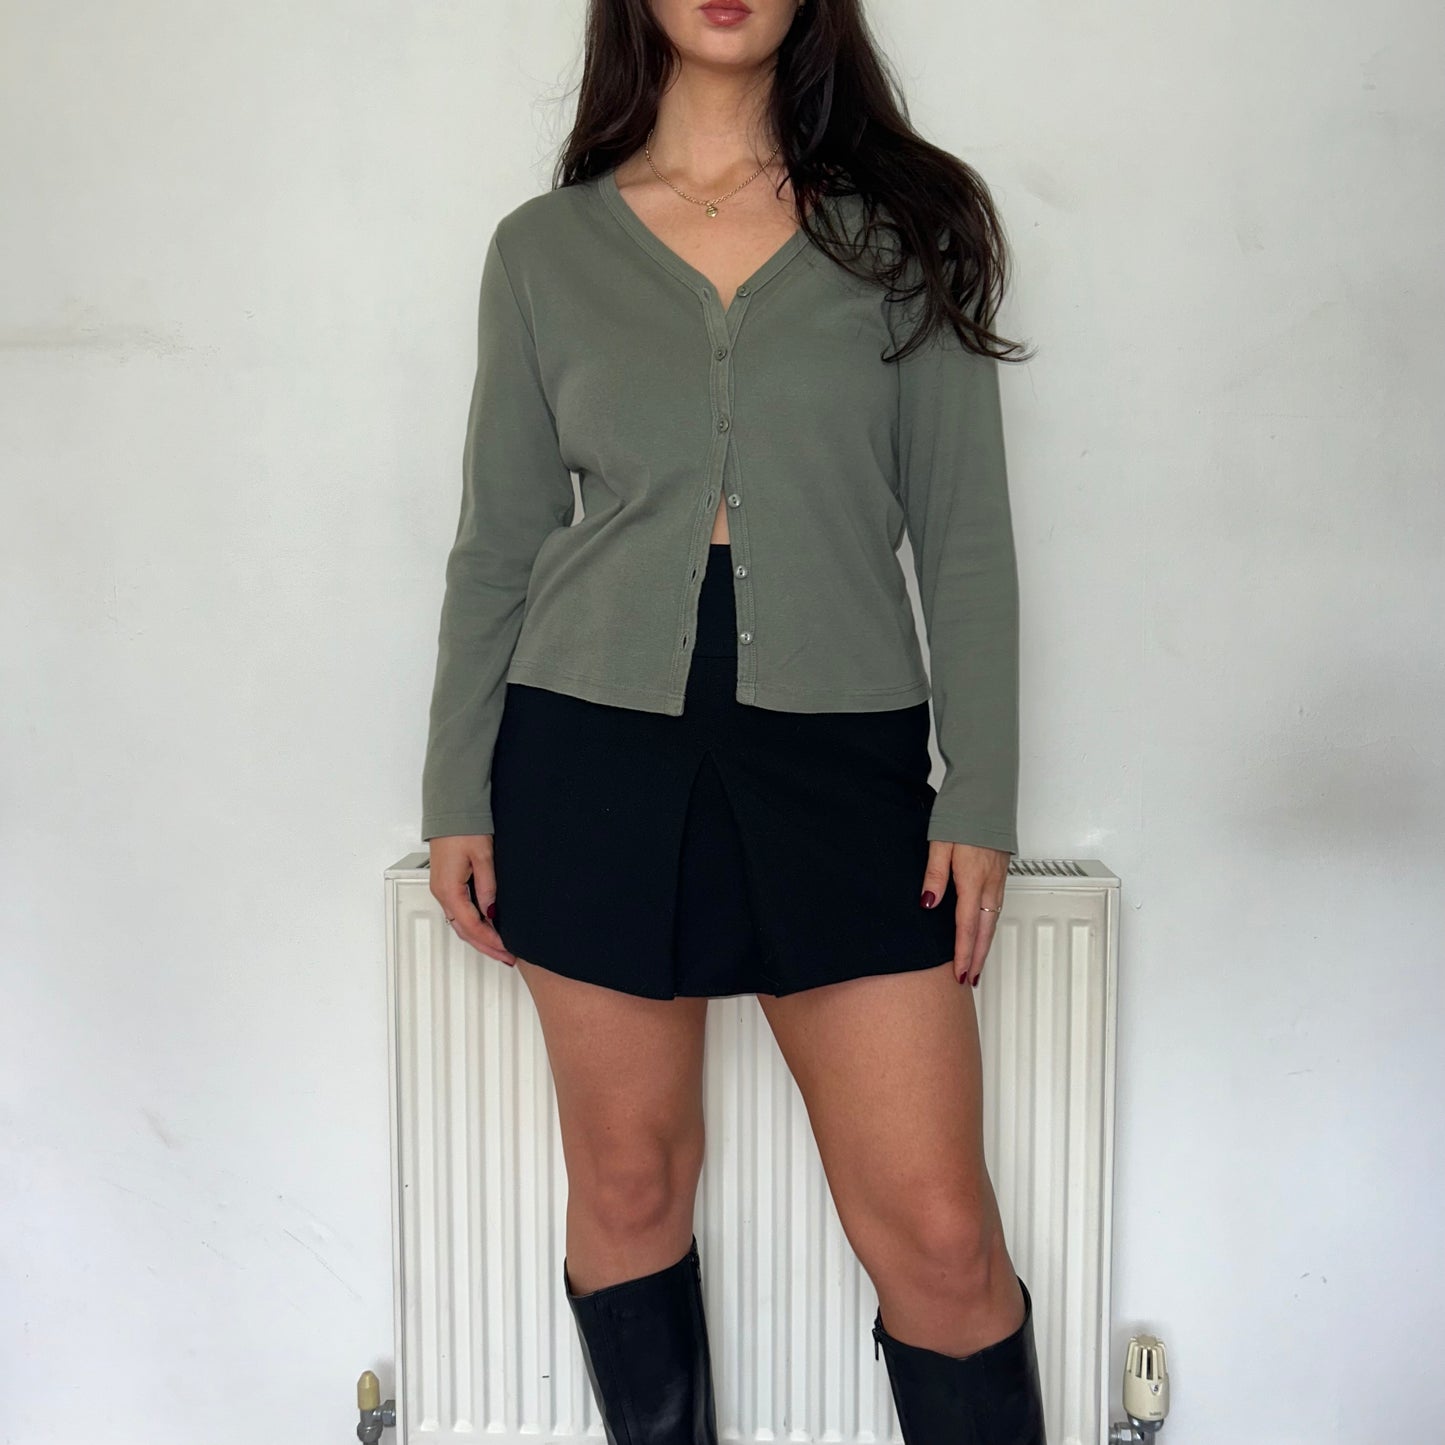 green button up long sleeve top shown on a model wearing a black skirt and black boots